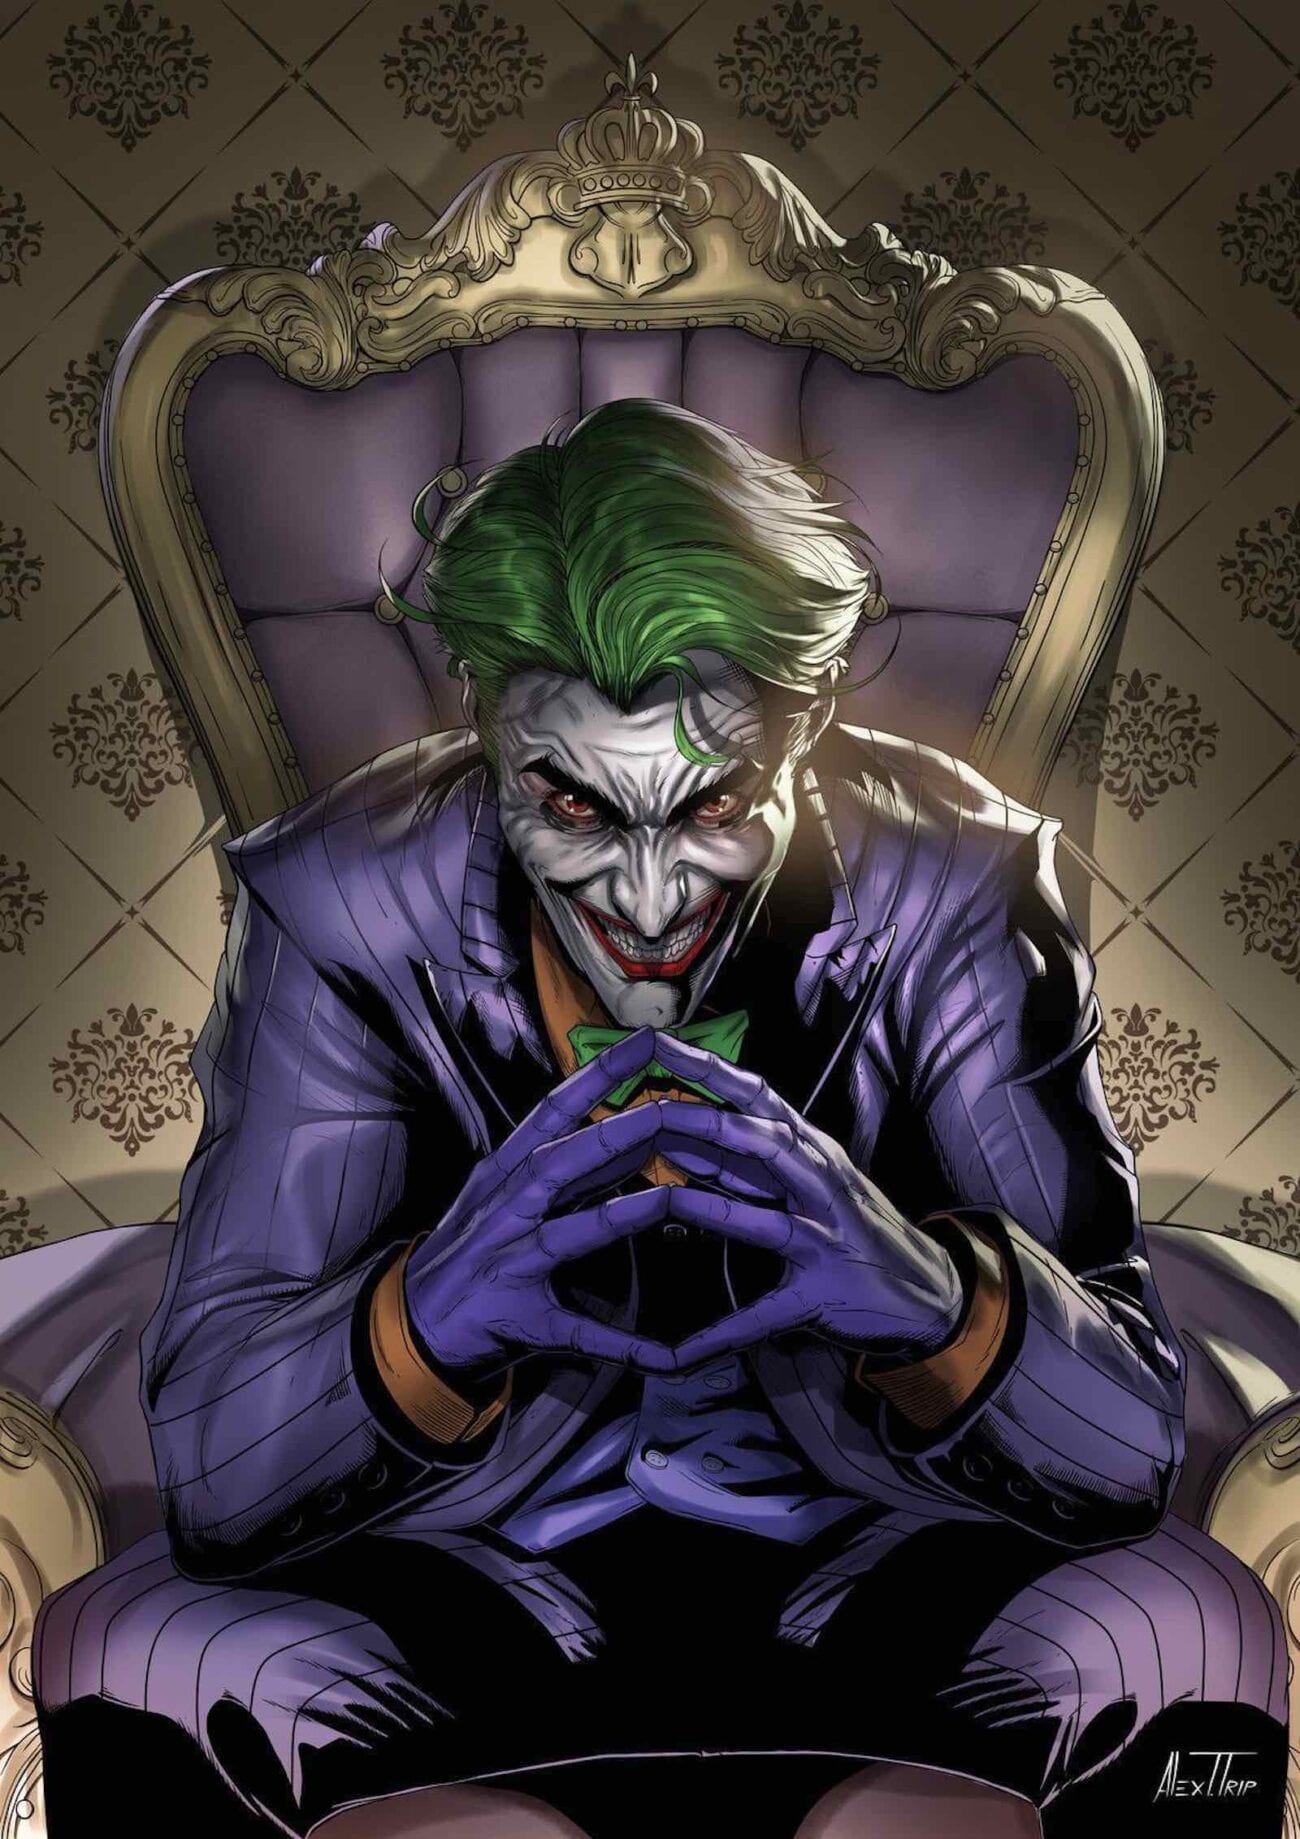 Will we ever decide on a winner from the best Jokers in Batman history? Let's put a smile on that face and crown the best clown prince of crime.